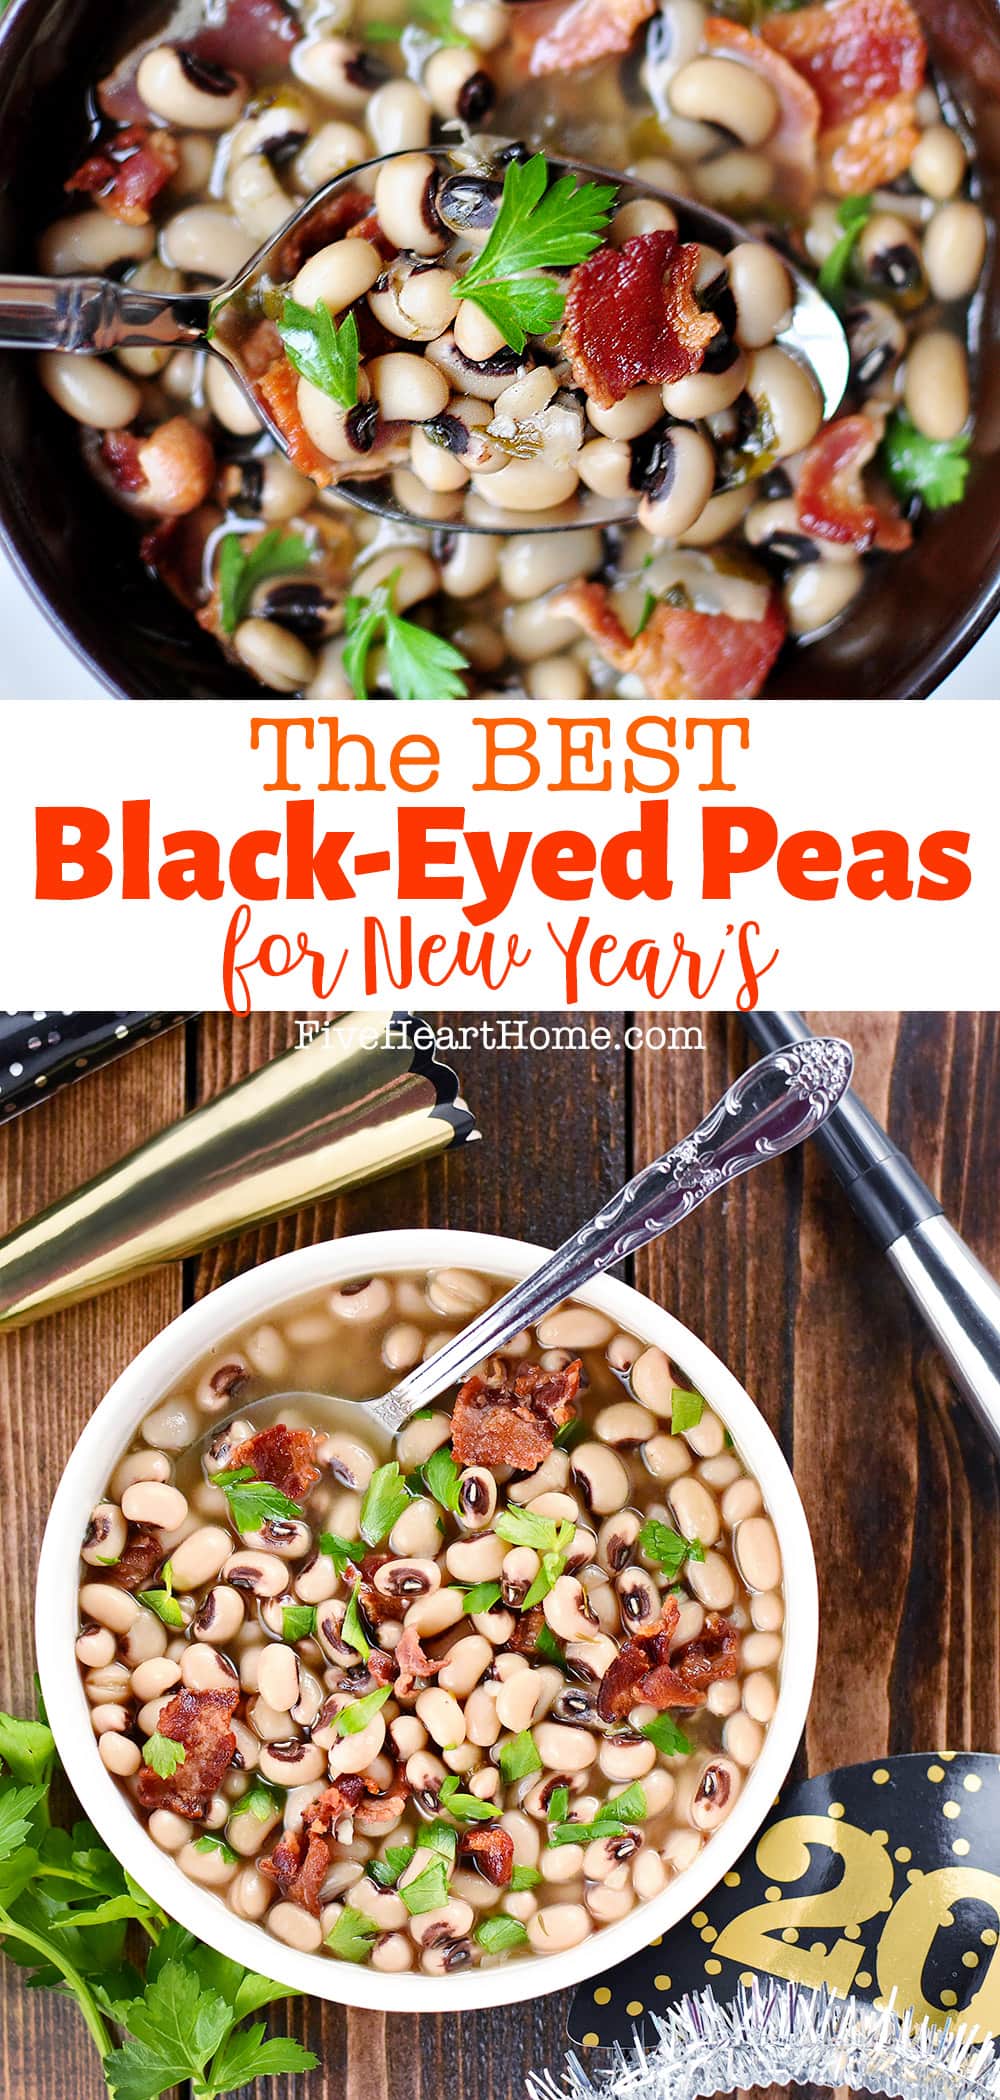 Black-Eyed Peas for New Year's ~ this delicious recipe is flavored with bacon, garlic, and thyme, for a savory soup that's said to bring luck and prosperity when eaten on New Year's Day! | FiveHeartHome.com via @fivehearthome